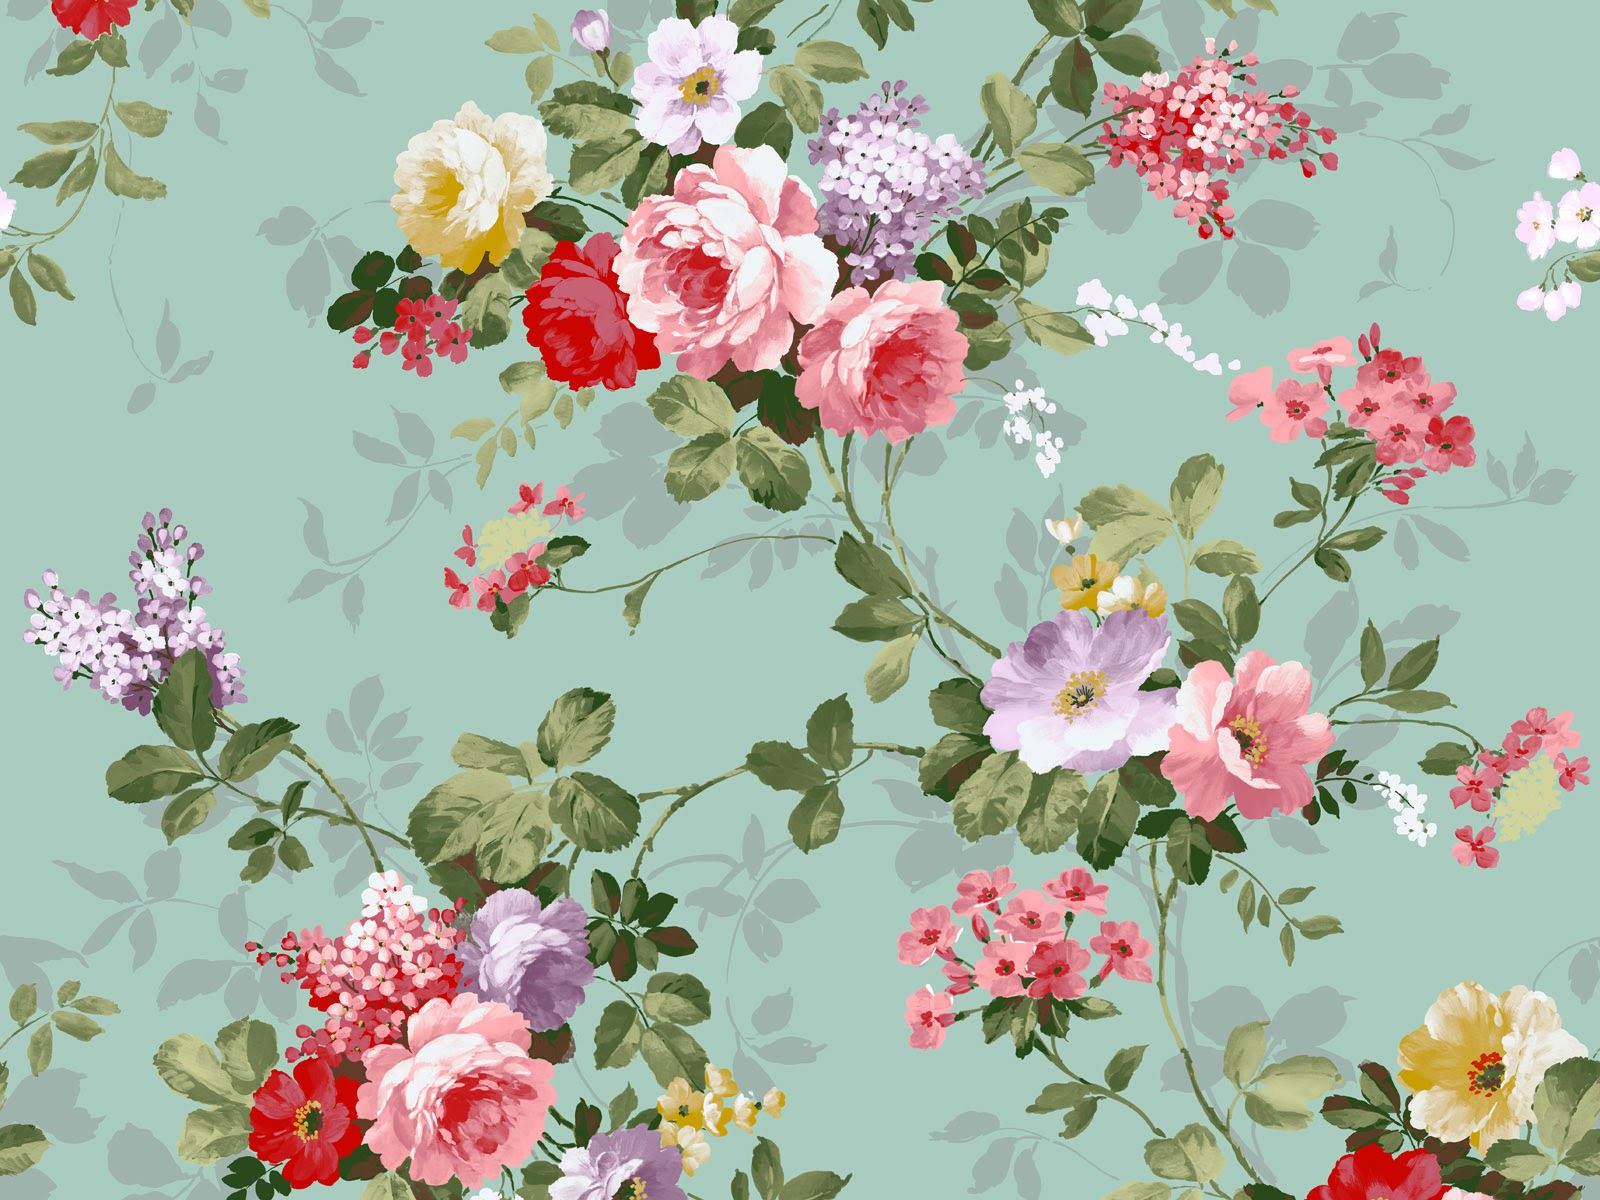 Floral Vintage Wallpapers in PSD